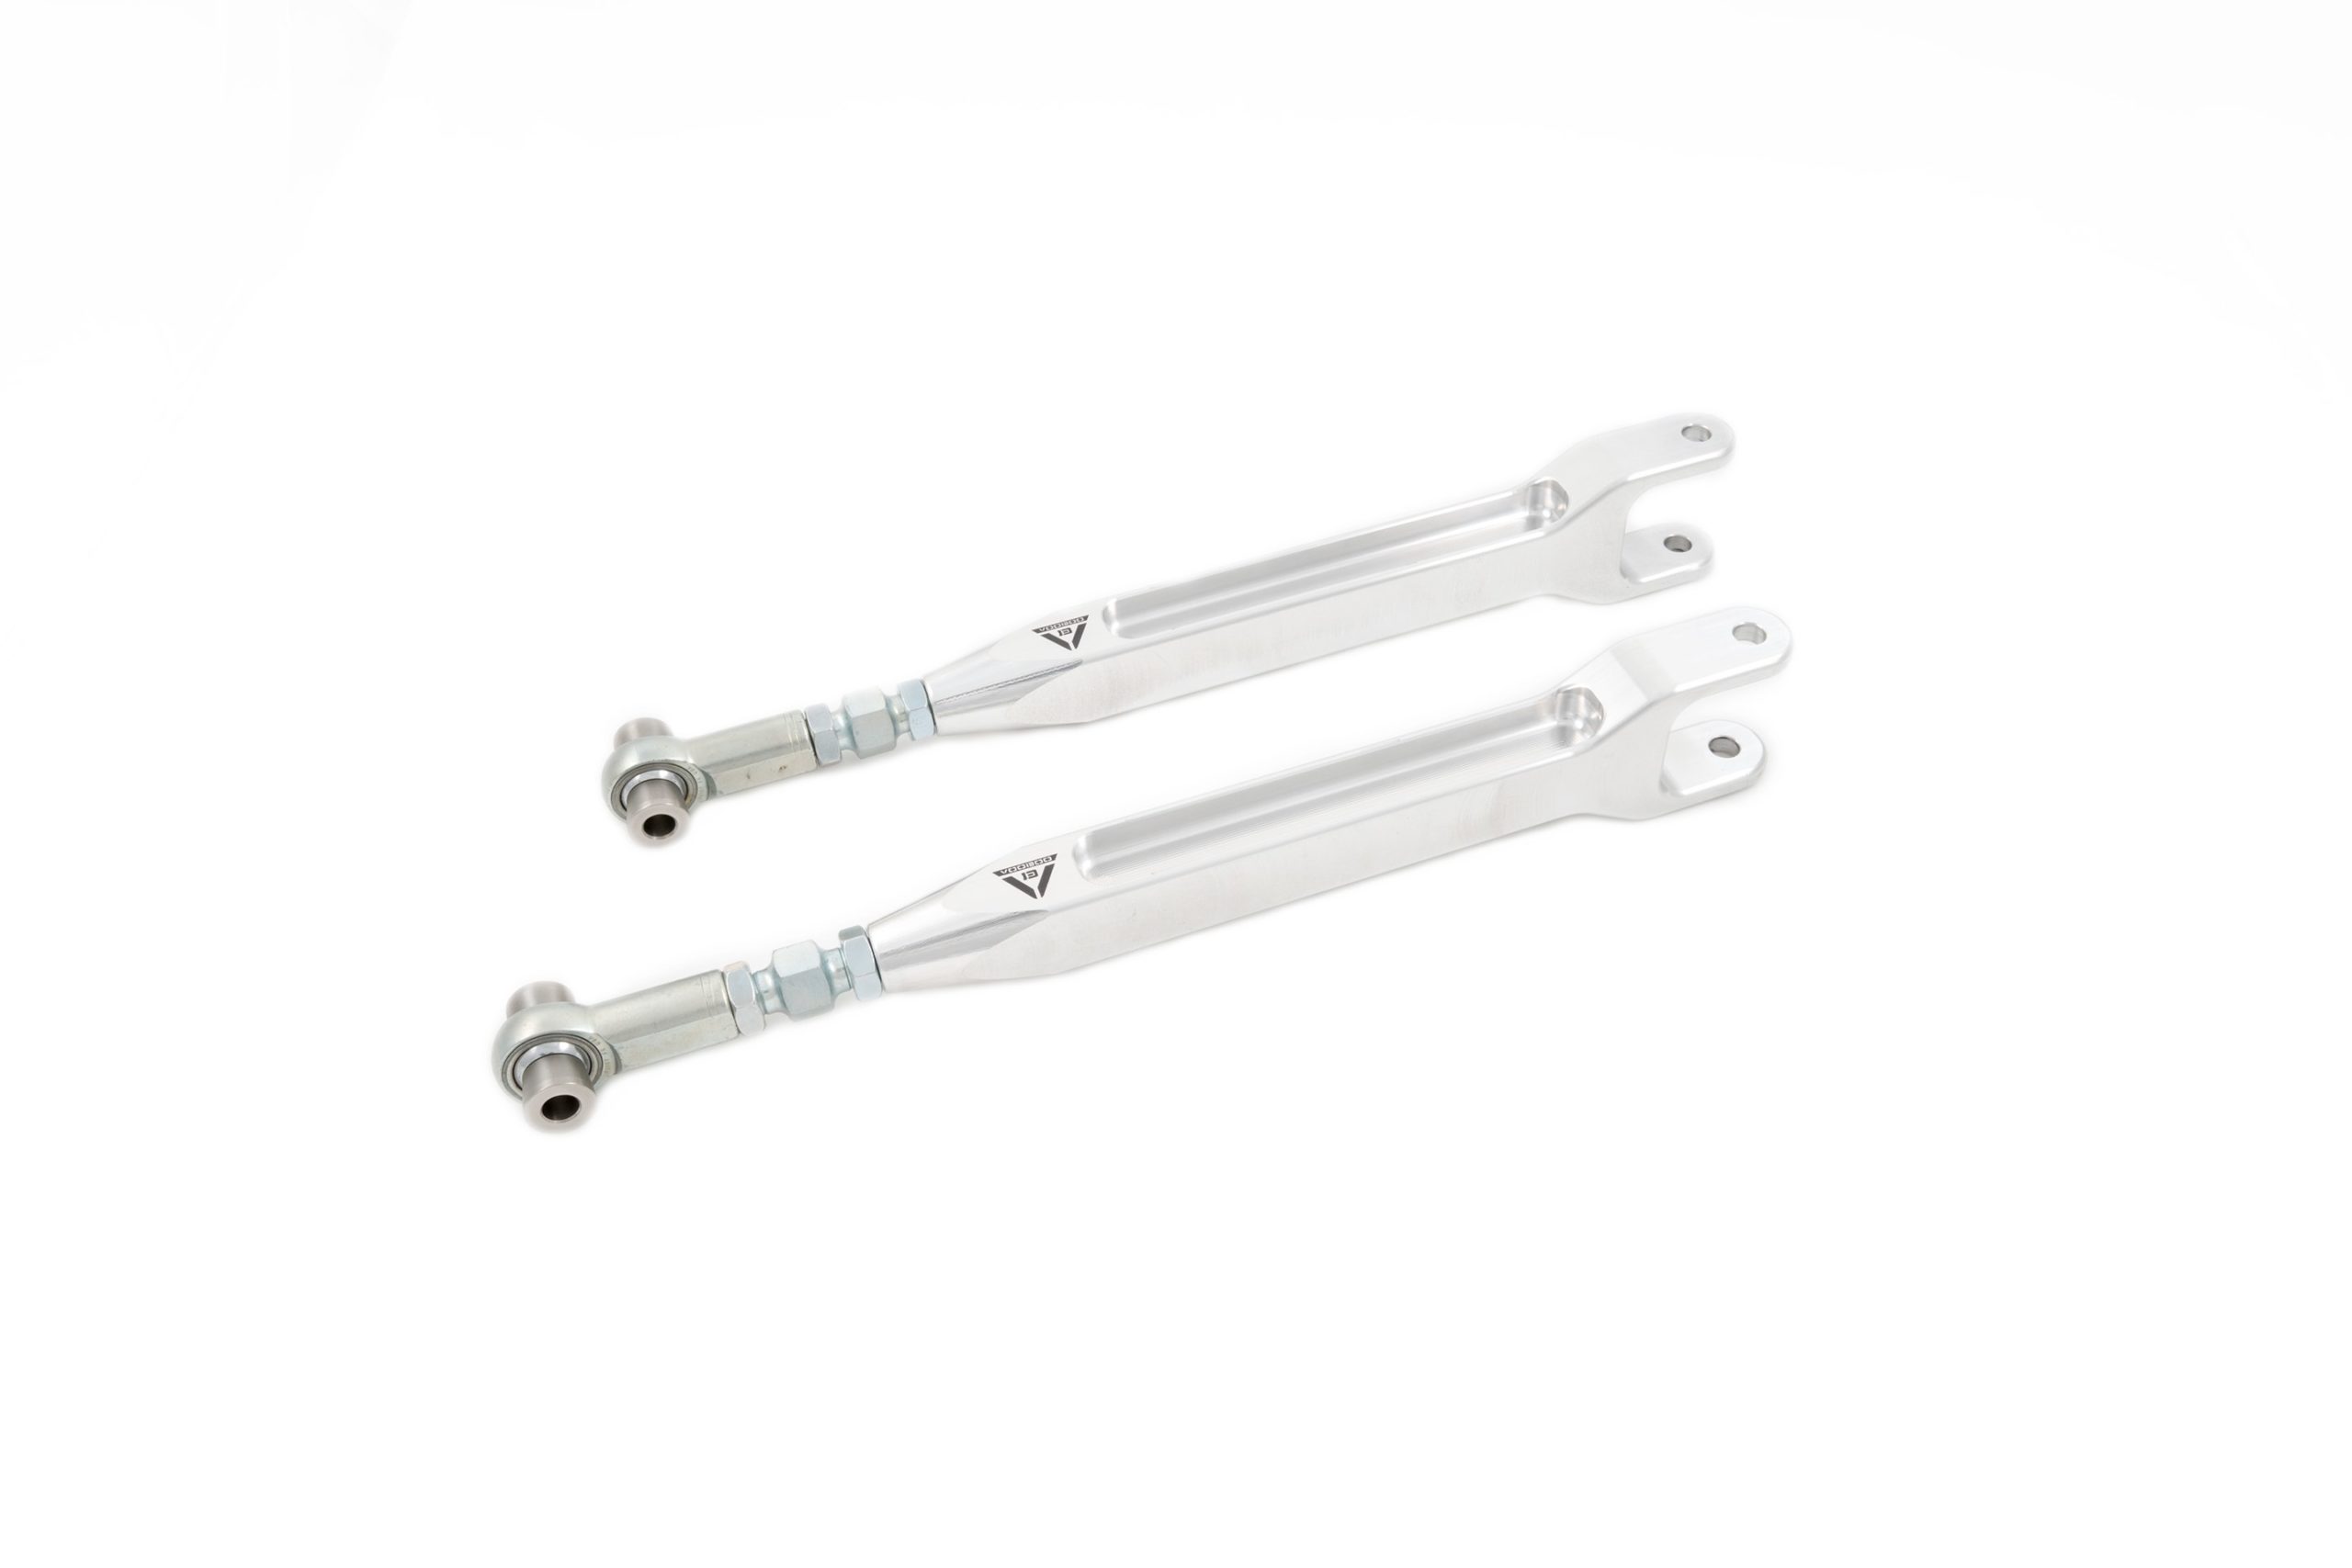 You are currently viewing New R35 Nissan GTR 09-16 Rear Adjustable Toe Arms